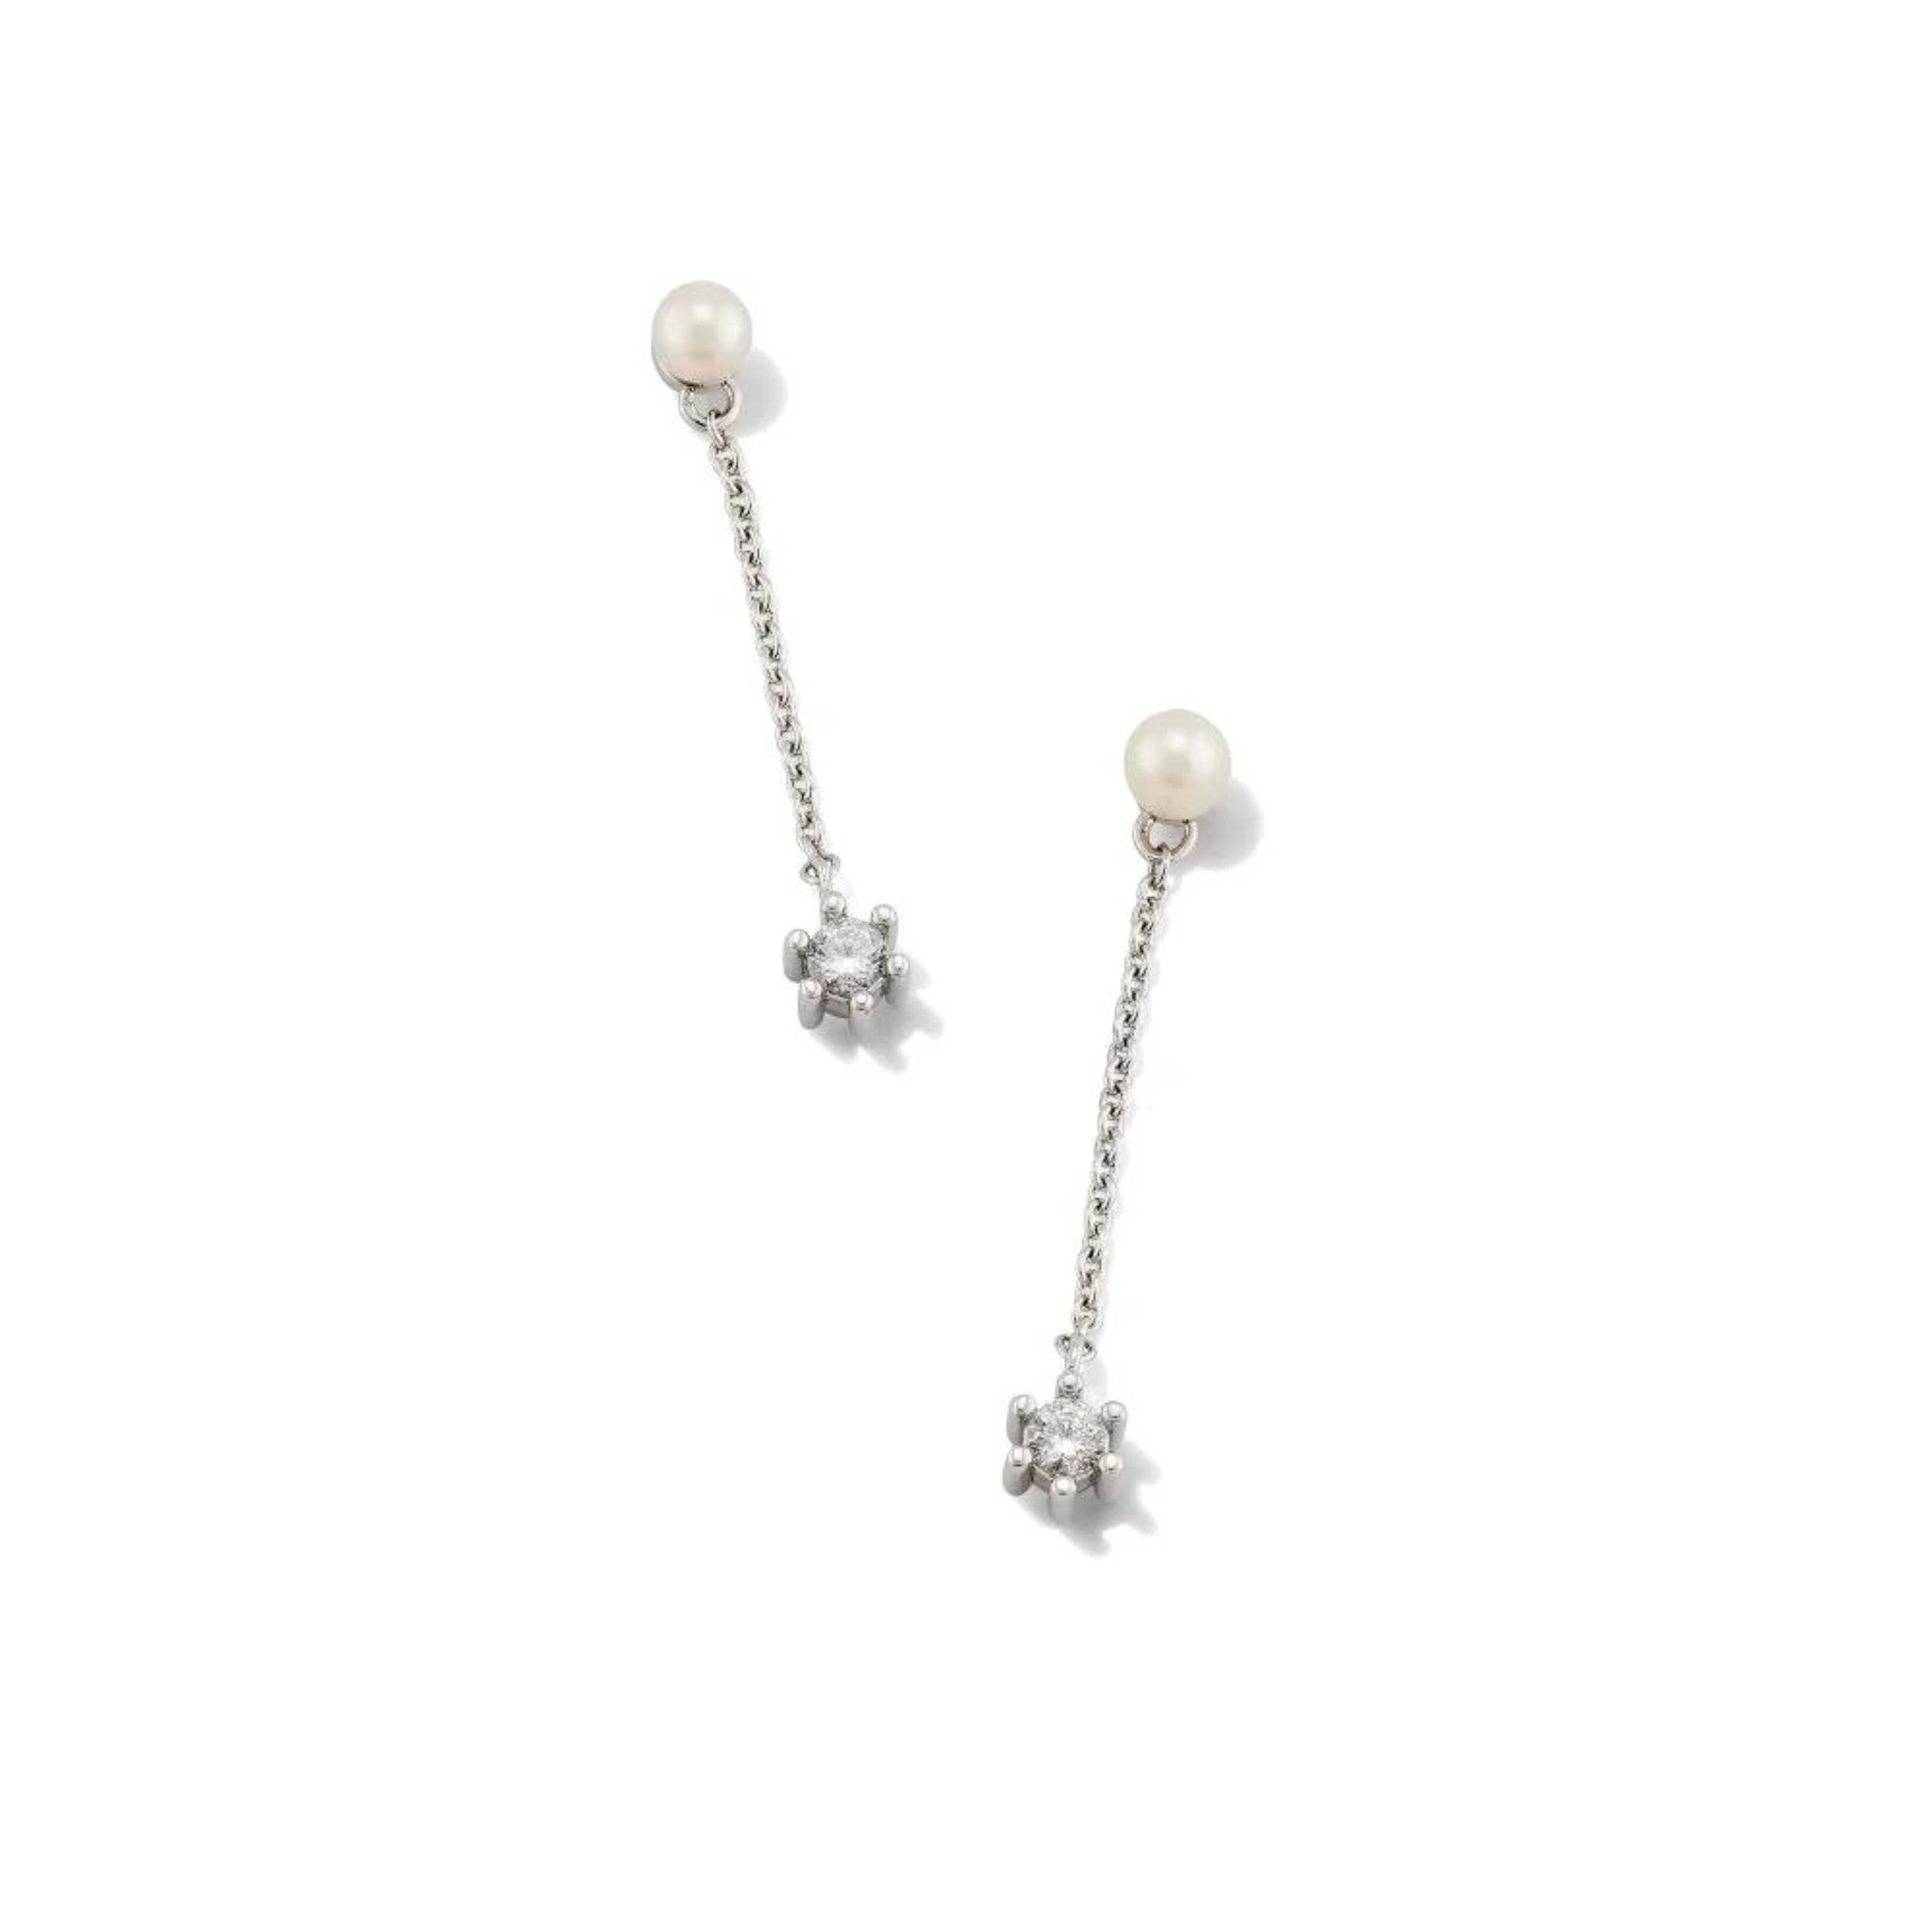 Kendra Scott | Leighton Silver Pearl Linear Earrings in White Pearl - Giddy Up Glamour Boutique